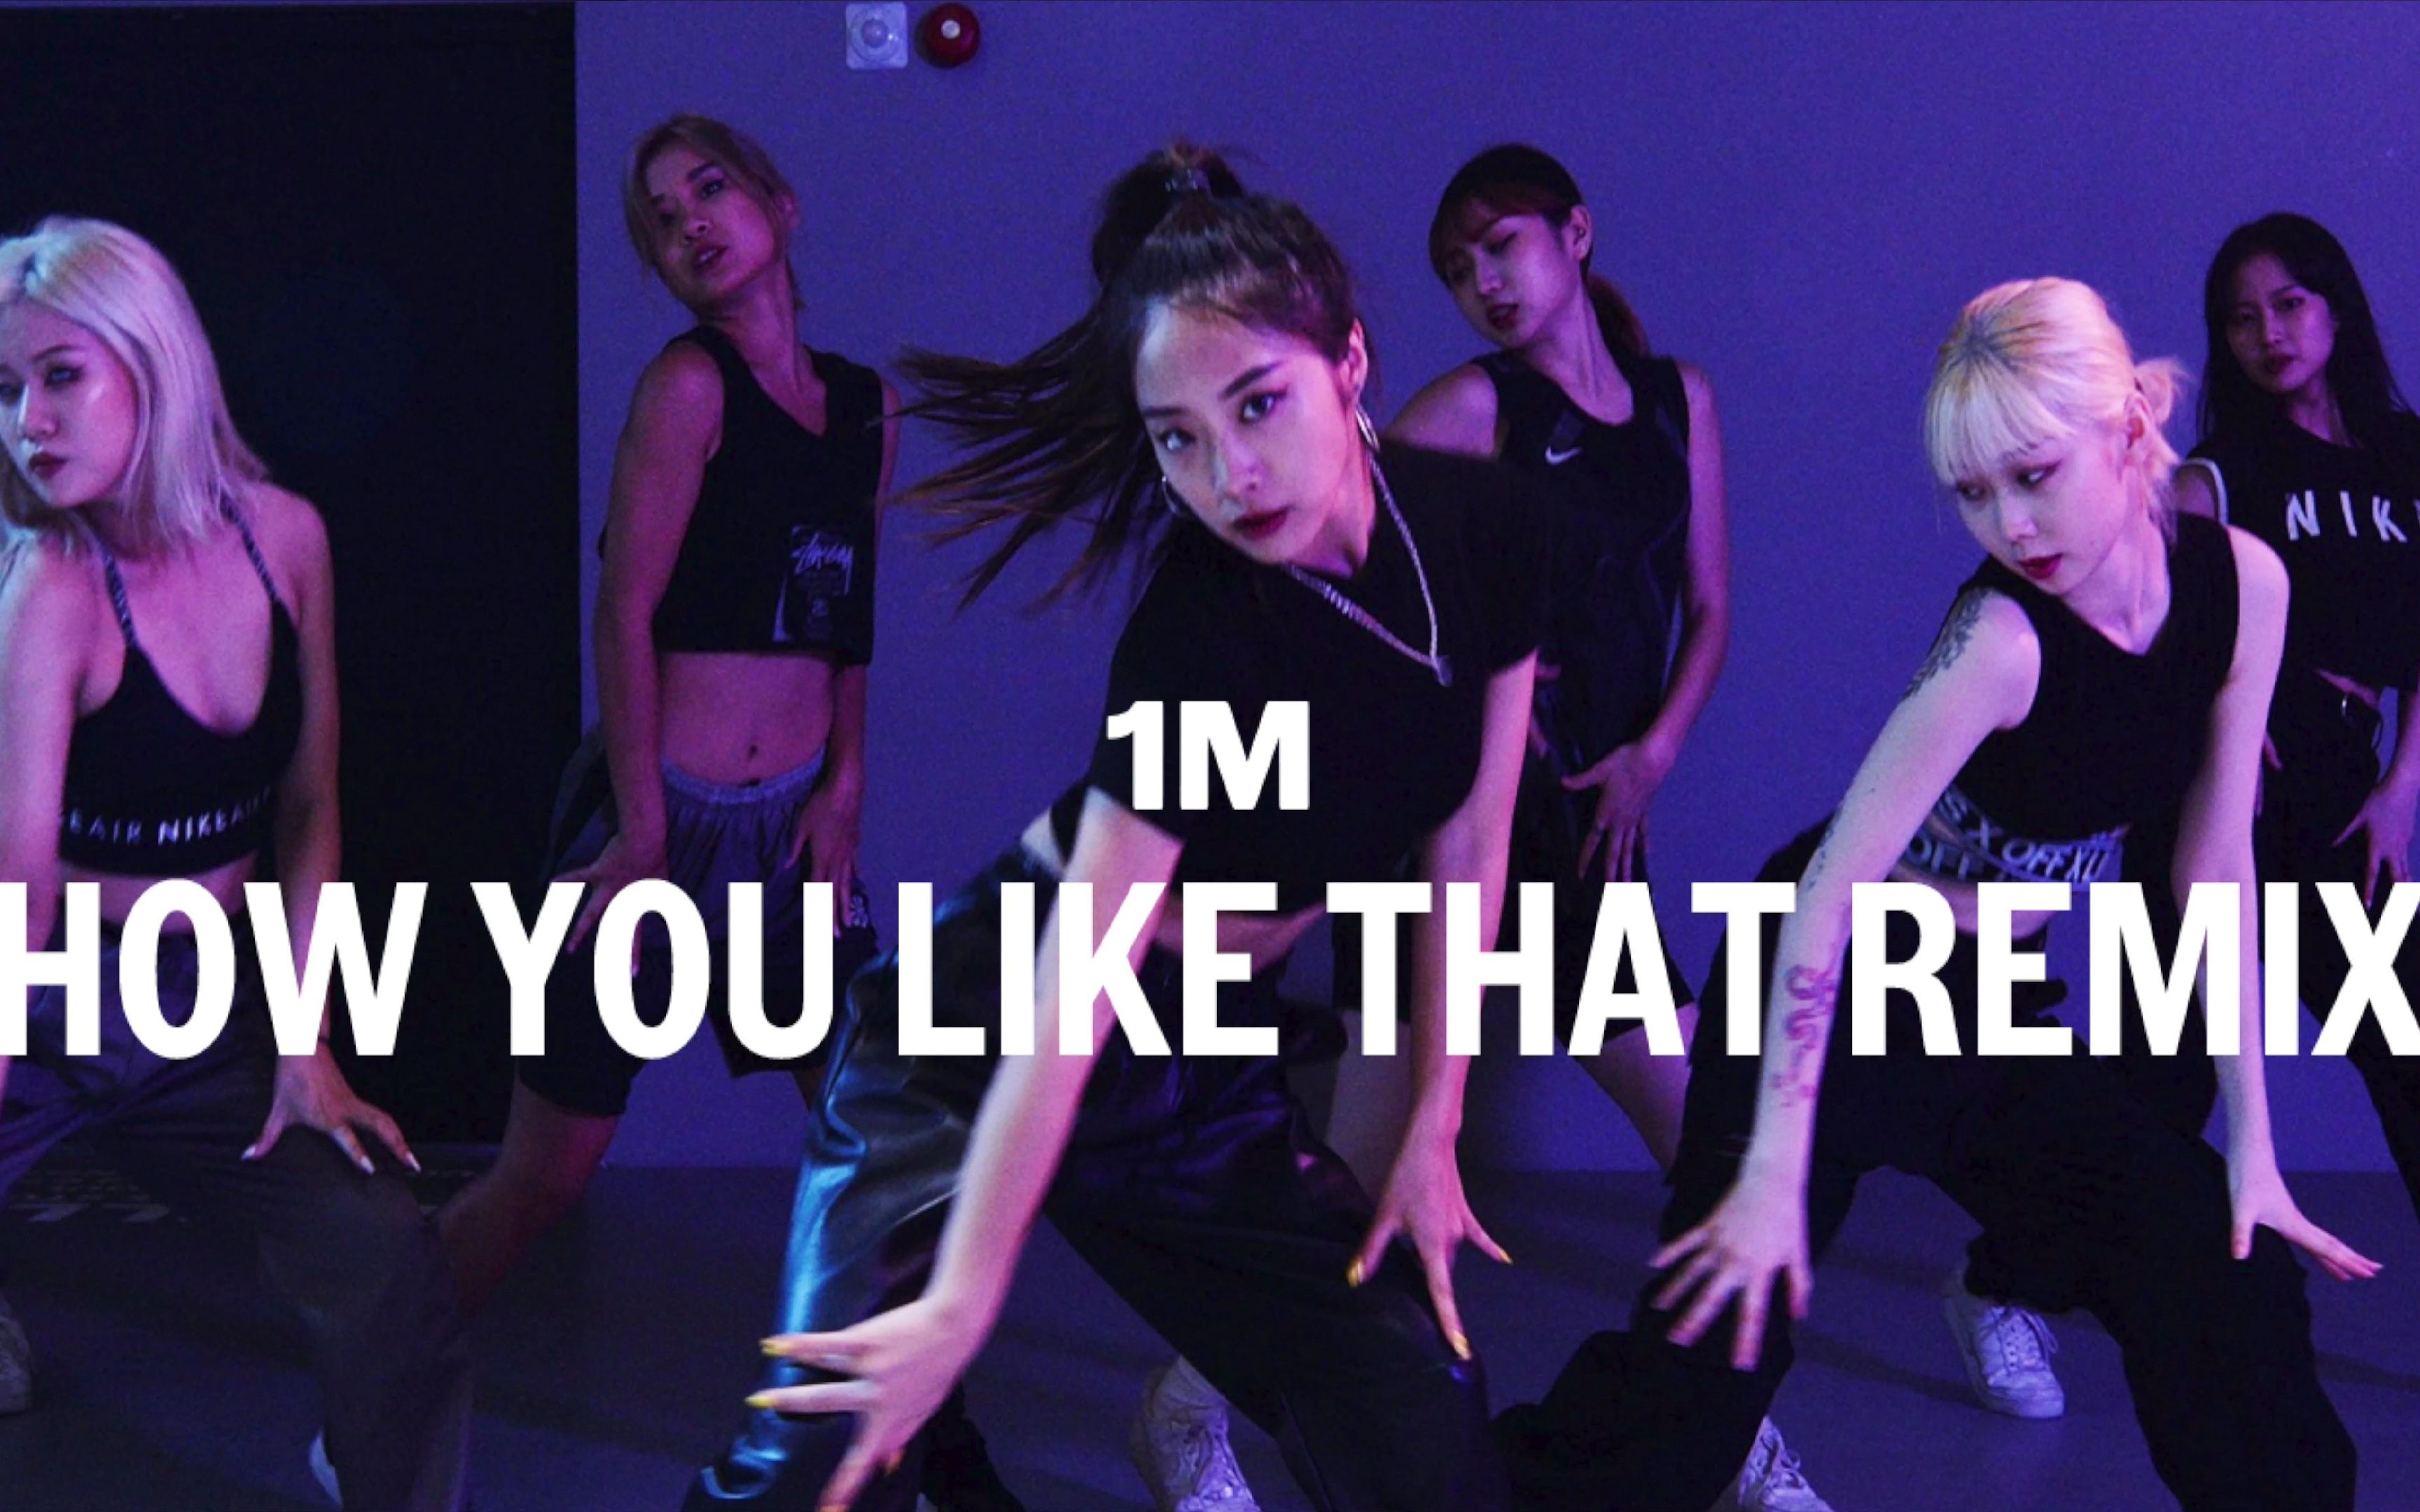 【1M】Amy Park 编舞《How You Like That Remix》